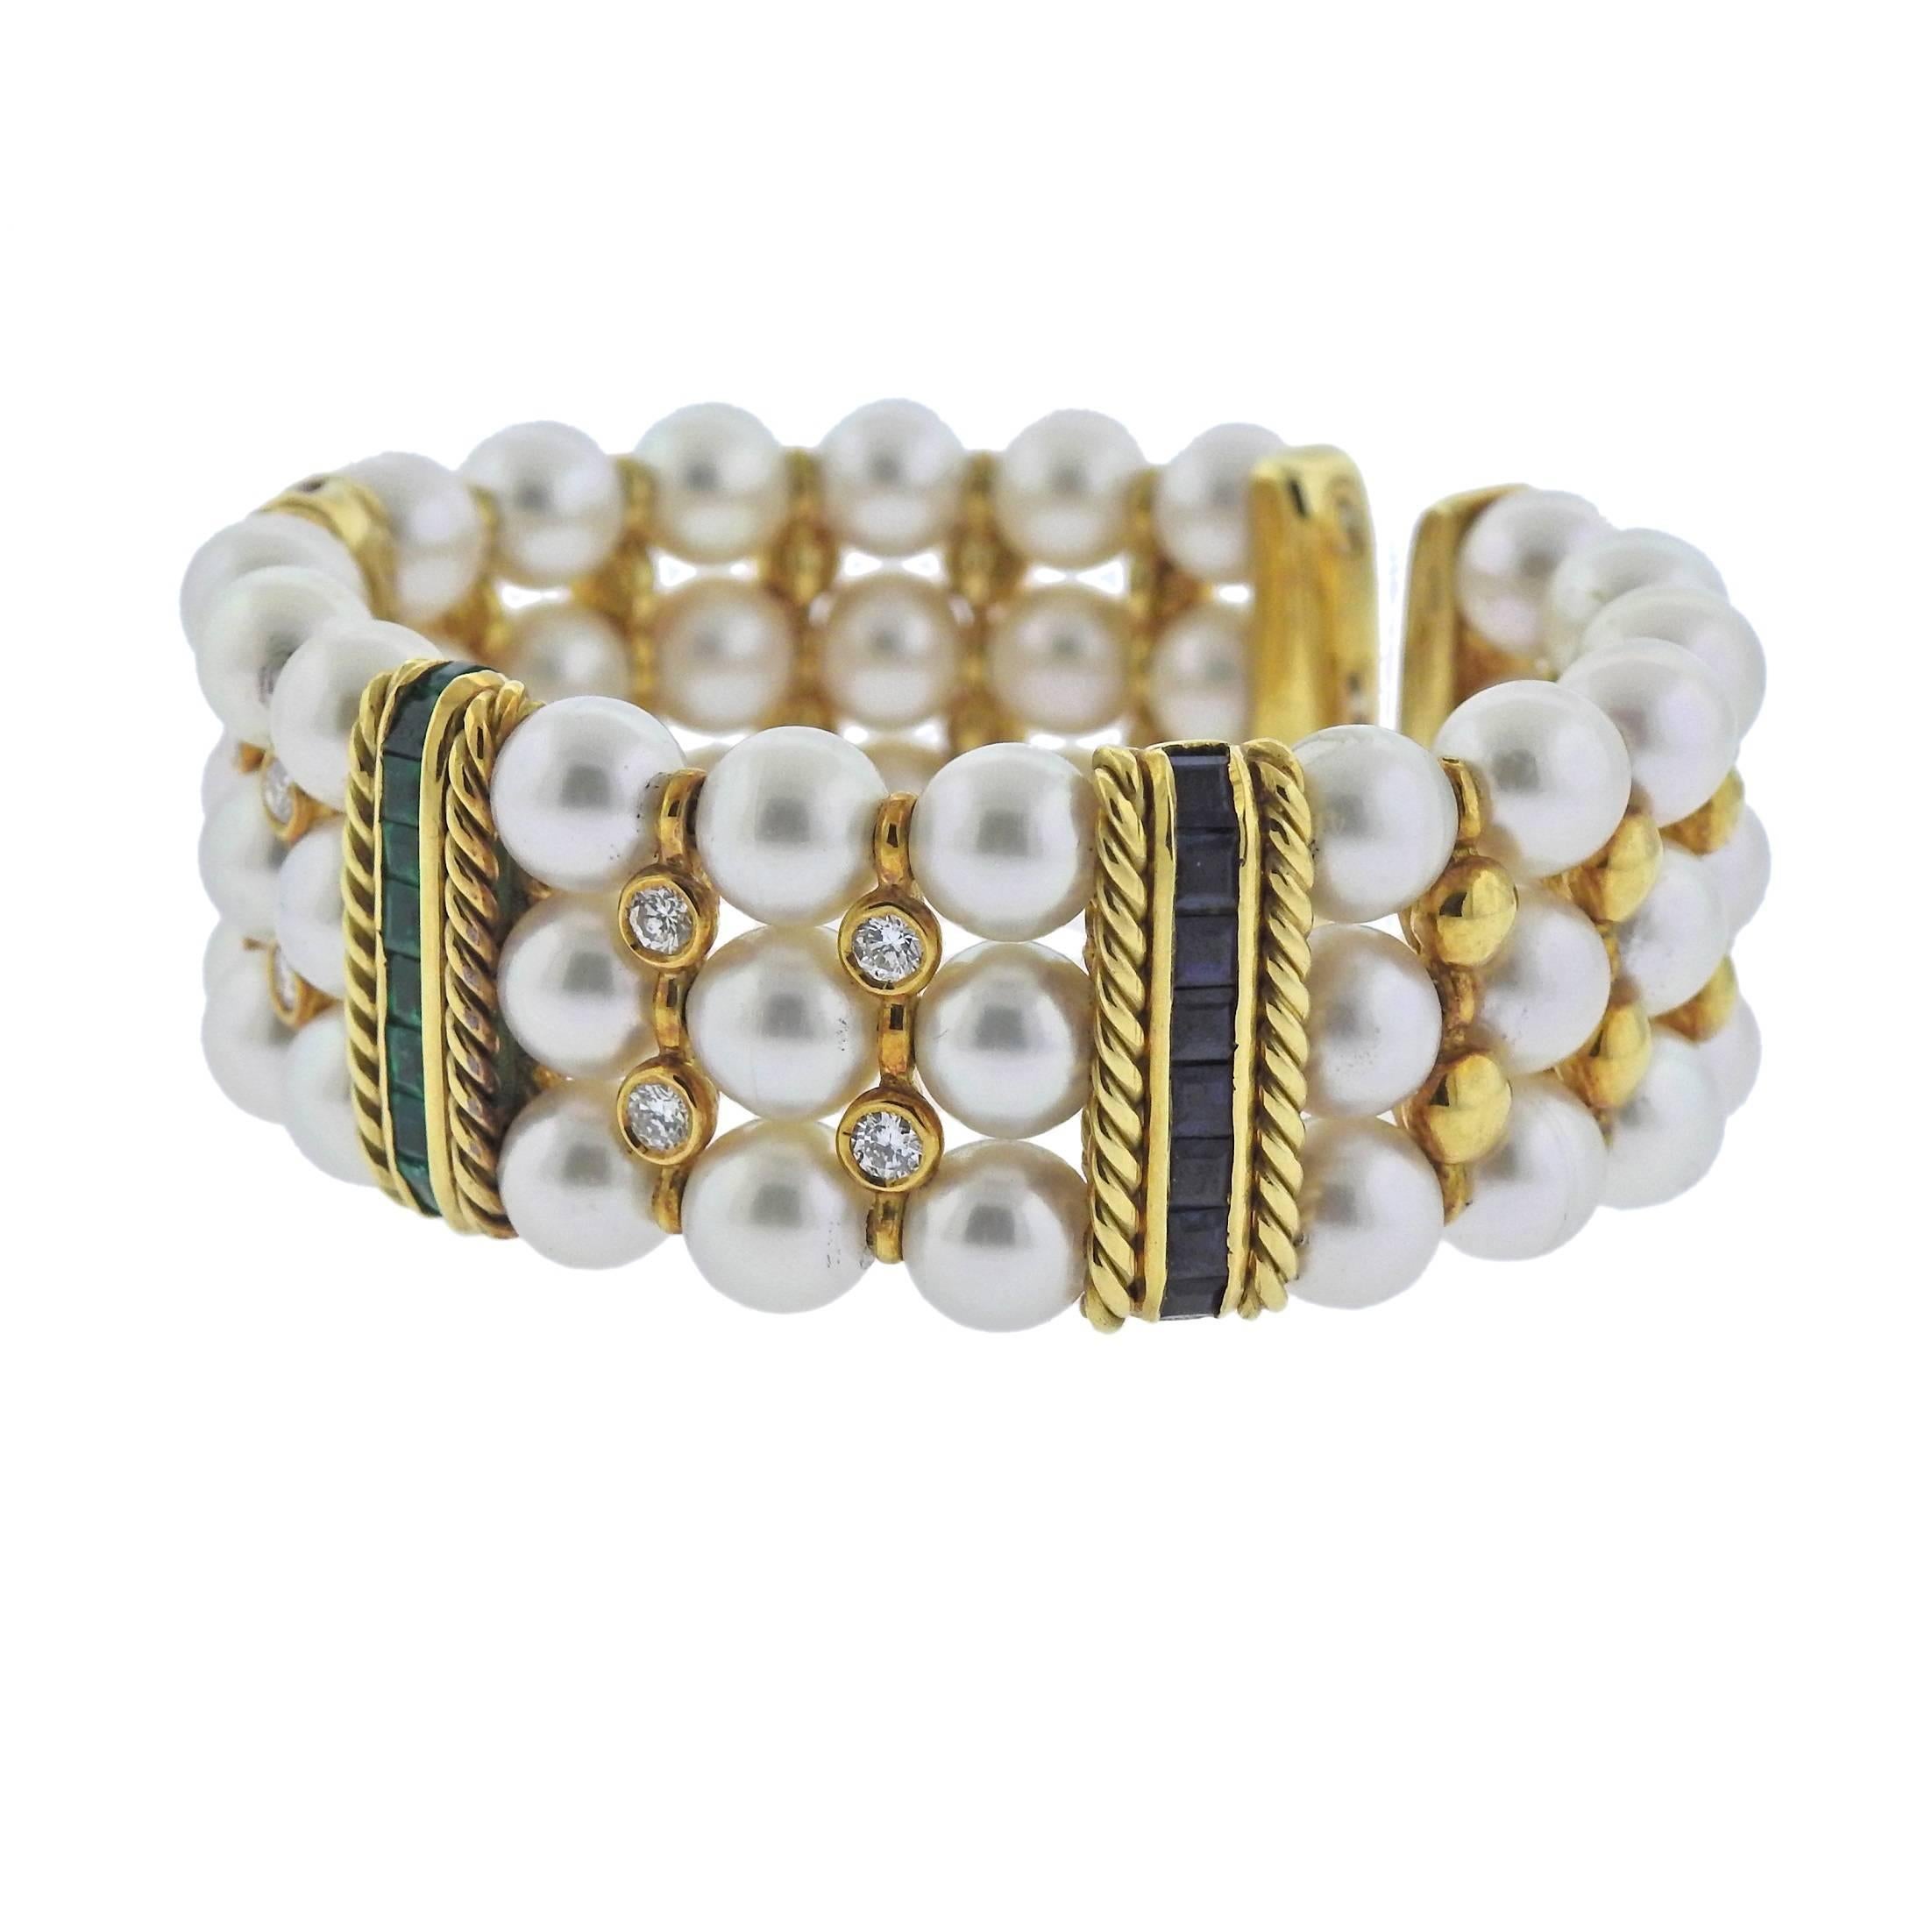  18k yellow gold cuff bracelet, set with three rows of 7-7.5mm pearls, adorned with emeralds, sapphires, rubies and diamonds - approx. 0.80ctw VS-SI/H. Bracelet will fit approx. 6.75-7